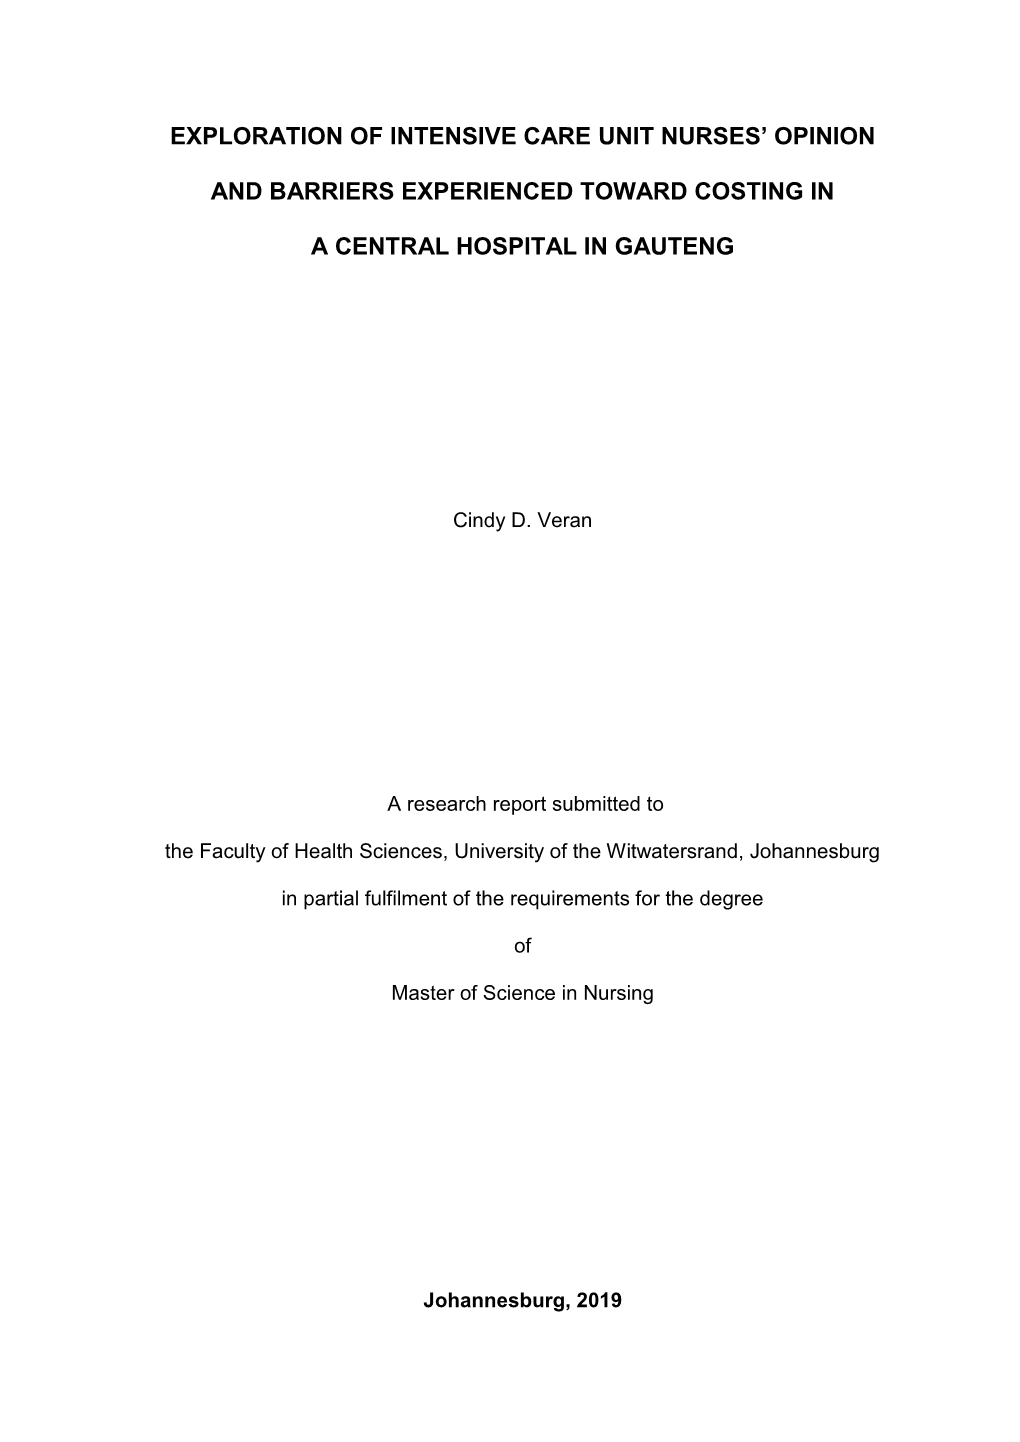 Exploration of Intensive Care Unit Nurses' Opinion And